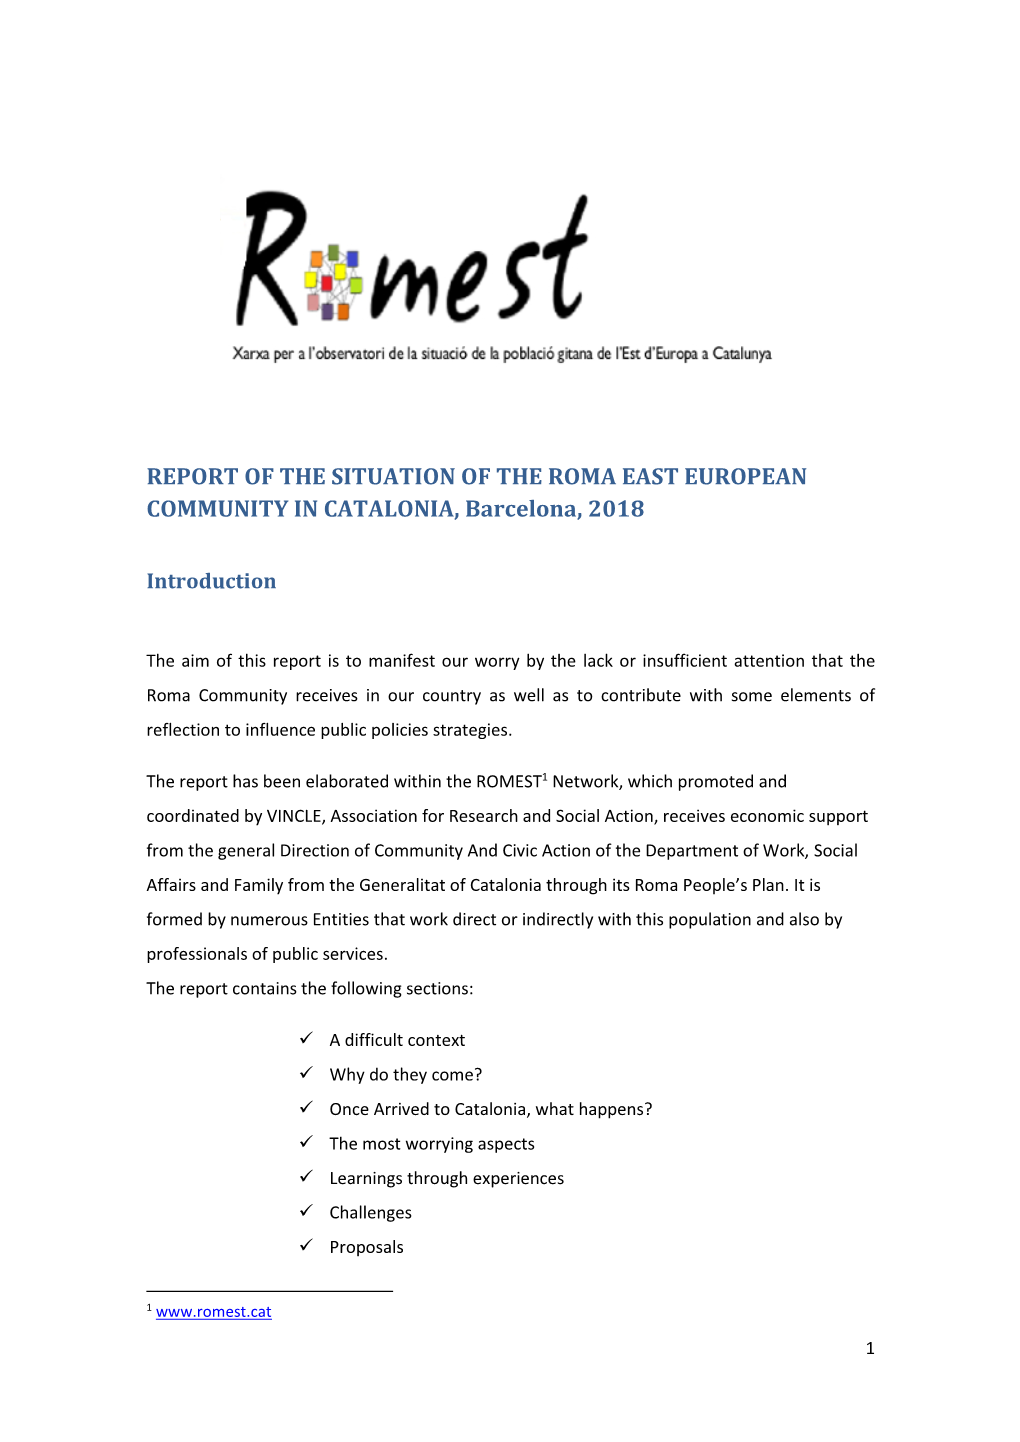 REPORT of the SITUATION of the ROMA EAST EUROPEAN COMMUNITY in CATALONIA, Barcelona, 2018